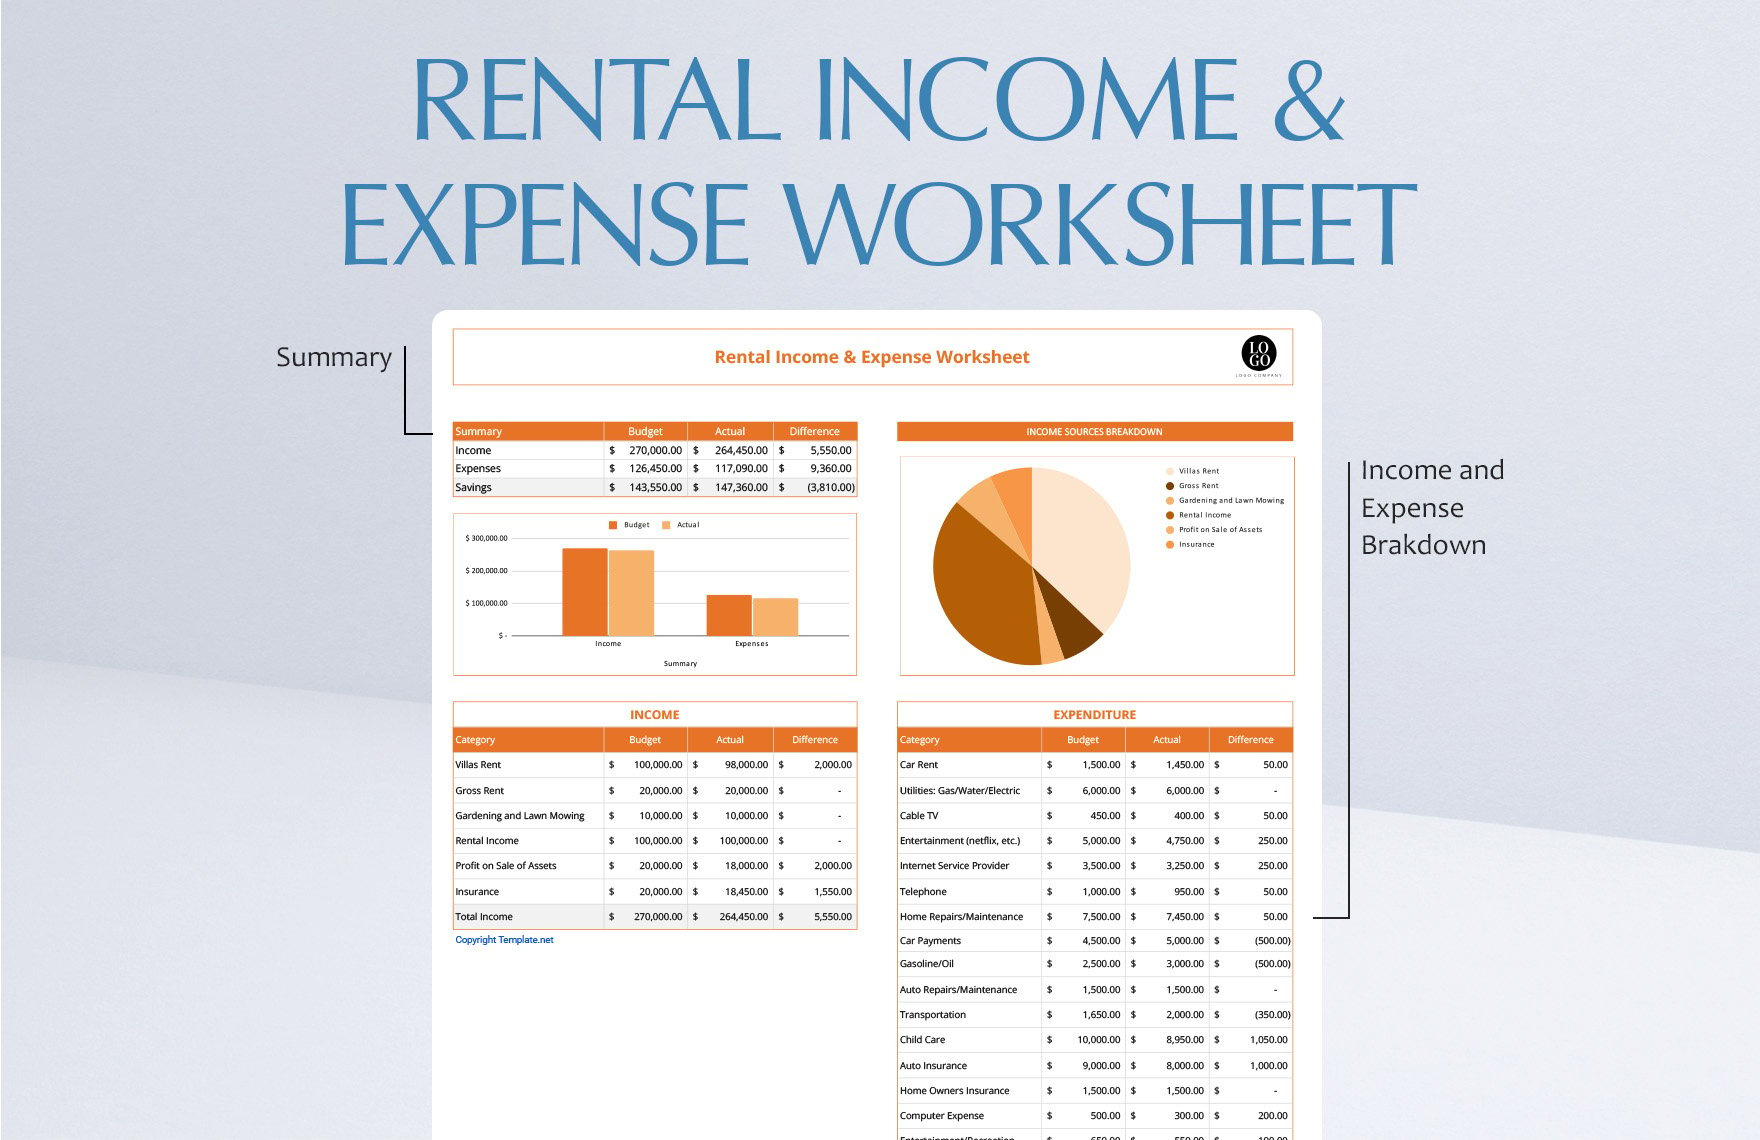 Rental Income & Expense Worksheet Template